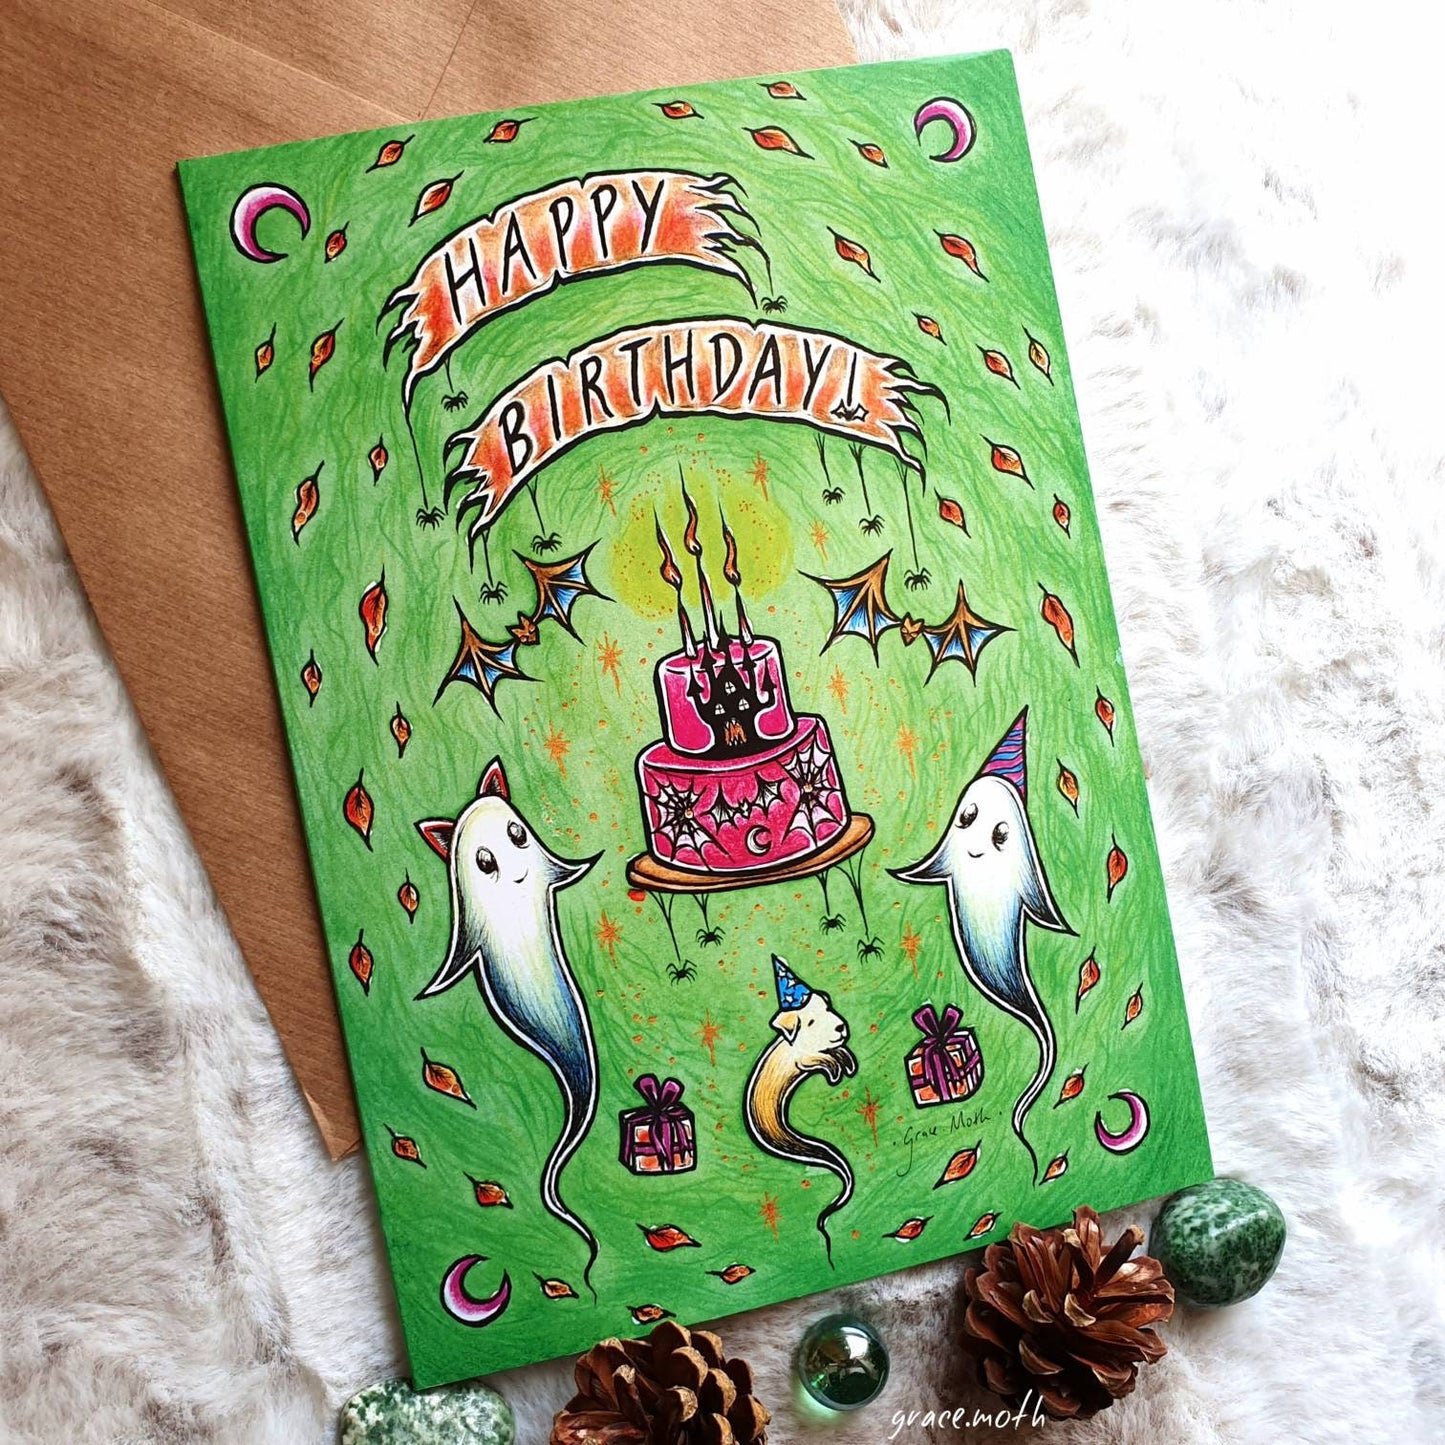 Ghosts birthday party - A5 greeting card by Grace Moth - 5.8 x 8.3